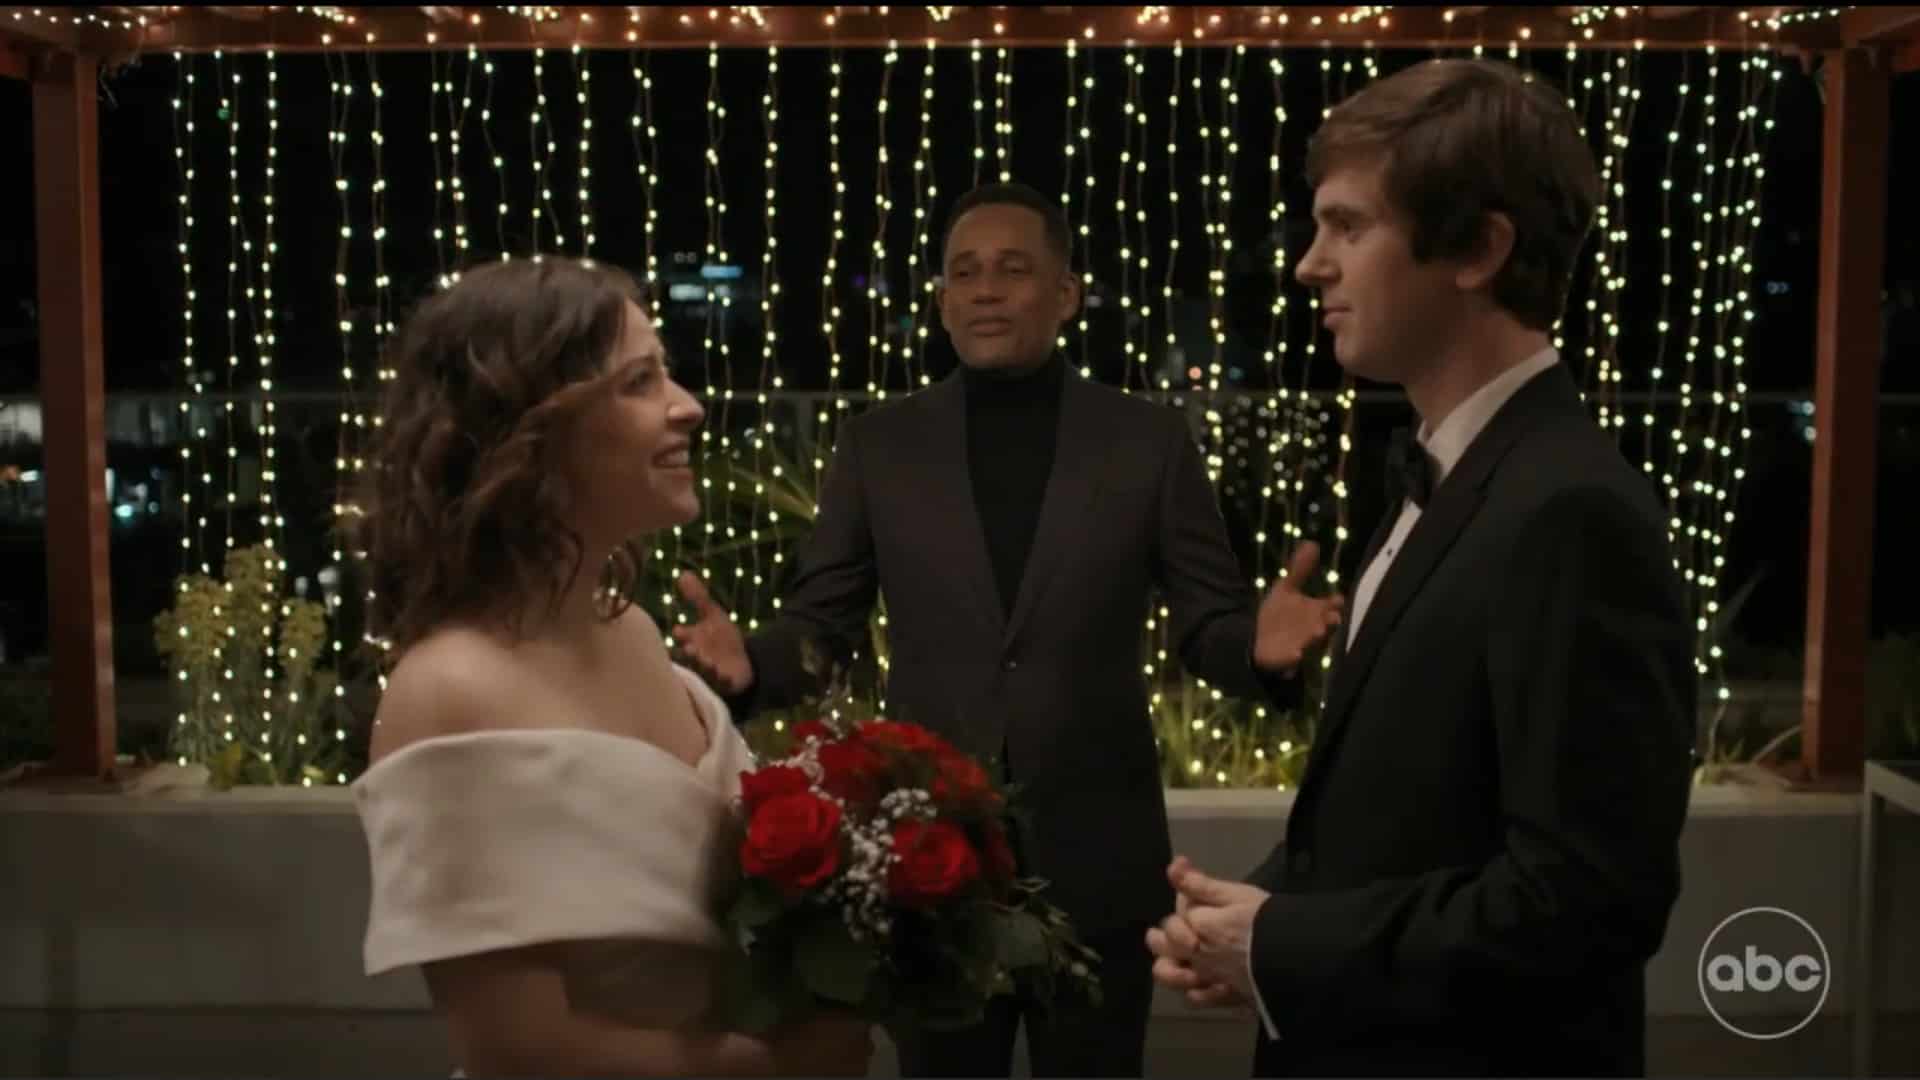 Lea and Shaun getting married